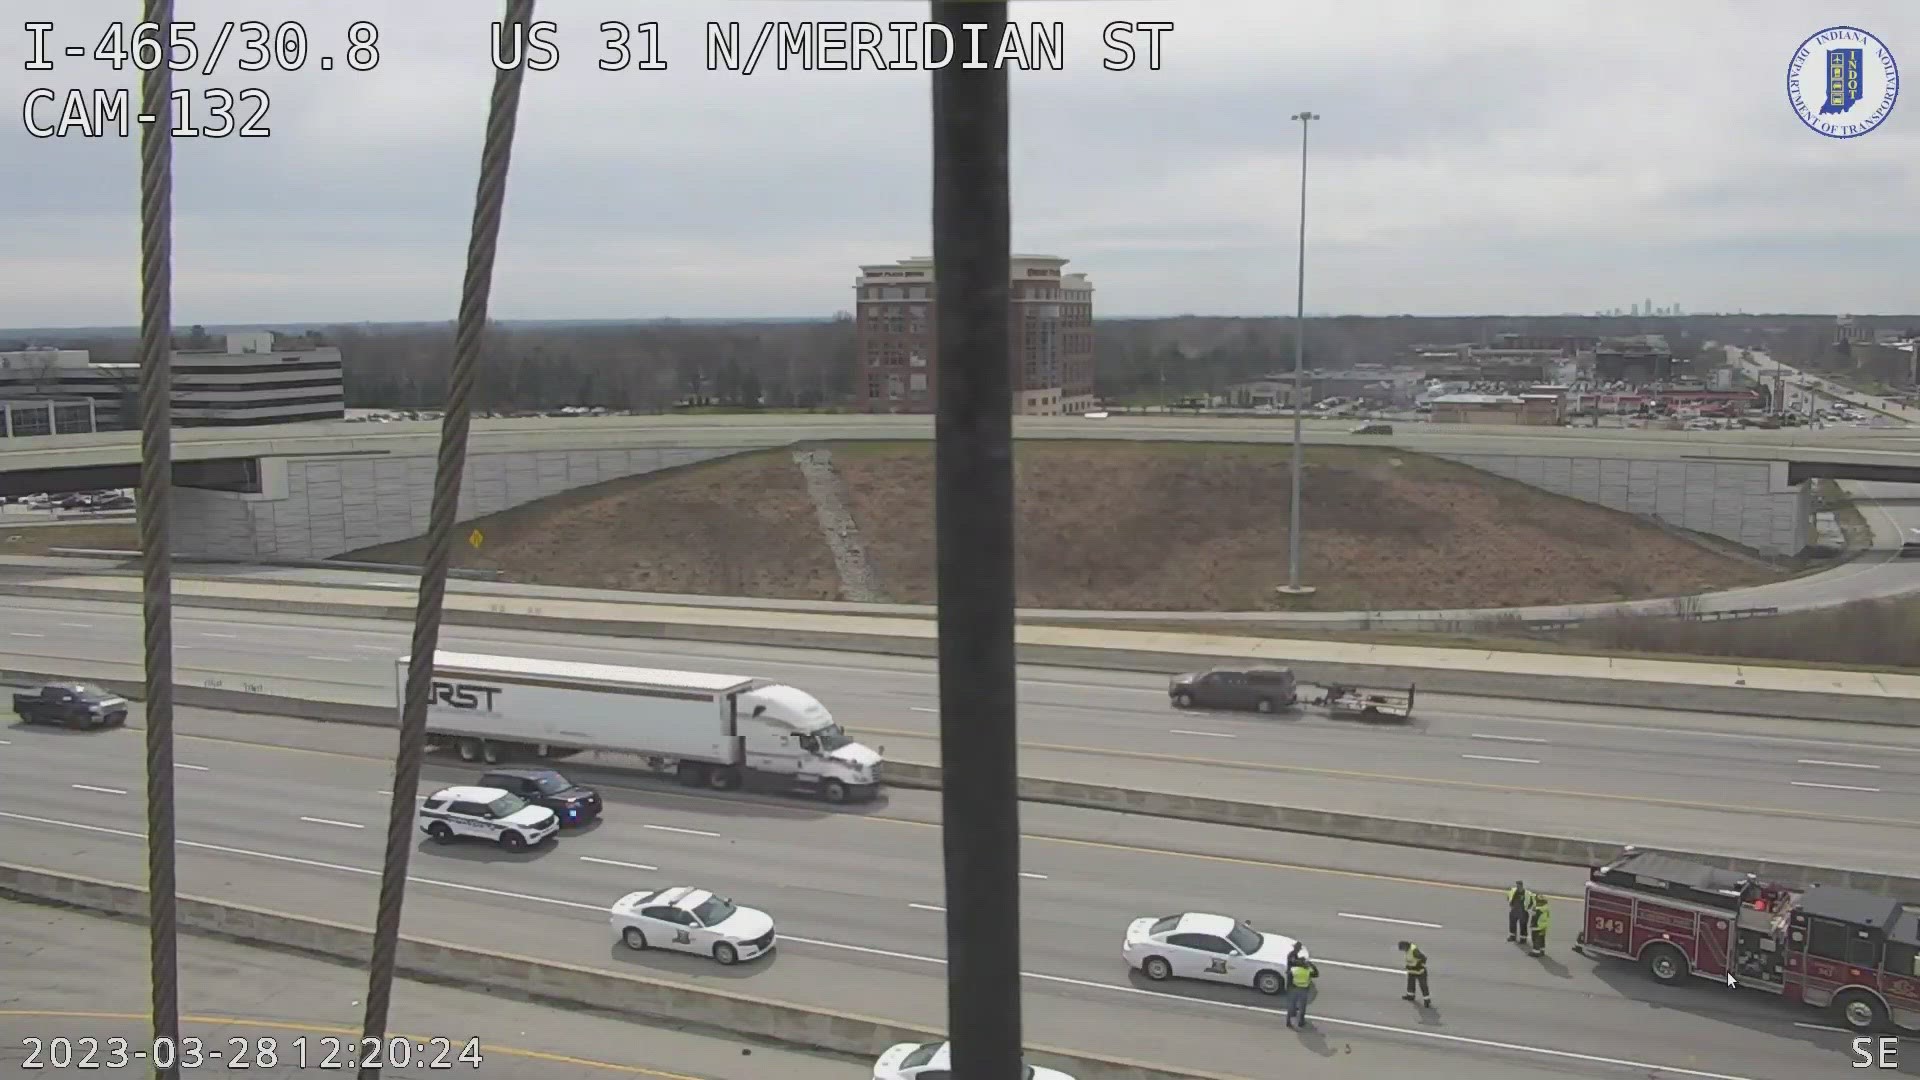 A pedestrian was critically injured Tuesday after being hit by a semi-truck on I-465 in Carmel, police said.